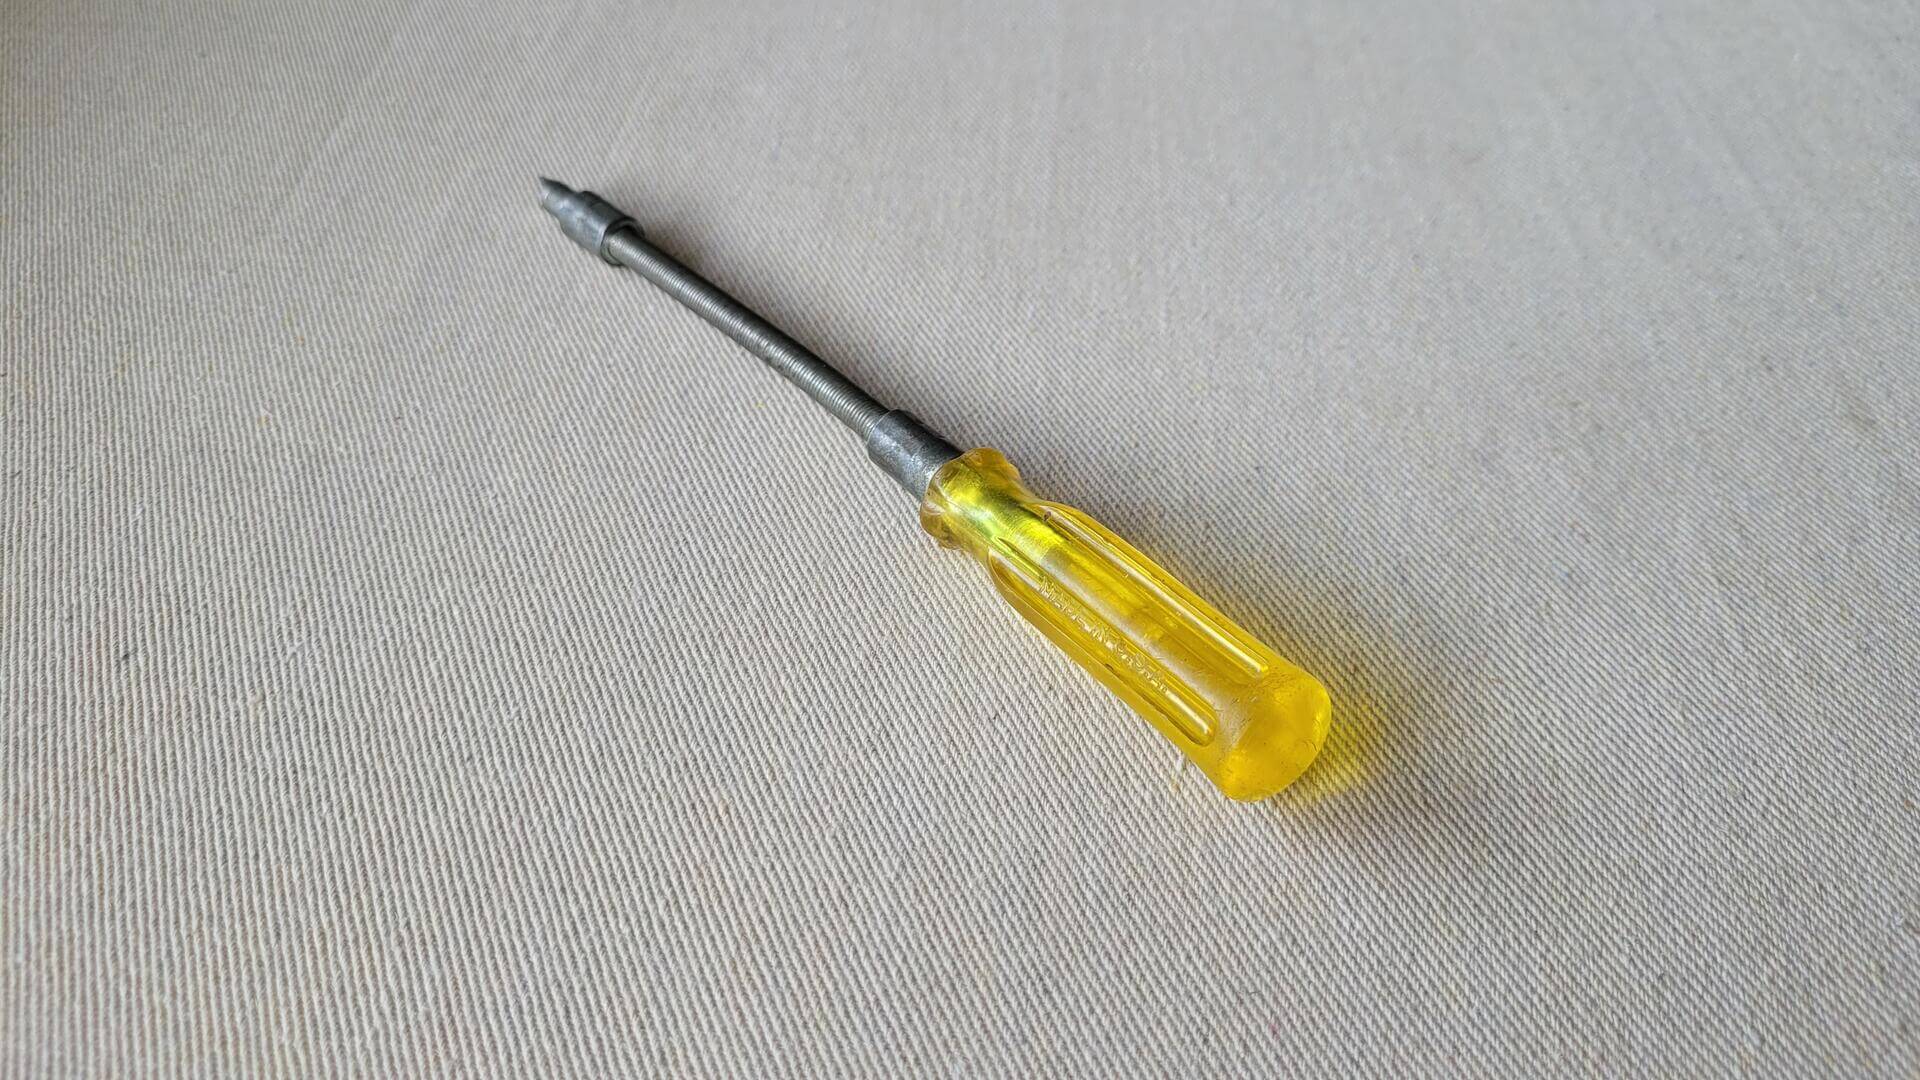 Nice retro flexible shaft slotted / flathead screwdriver 7 1/2 inches long. Vintage made in USA collectible mechanic and automotive hand tools